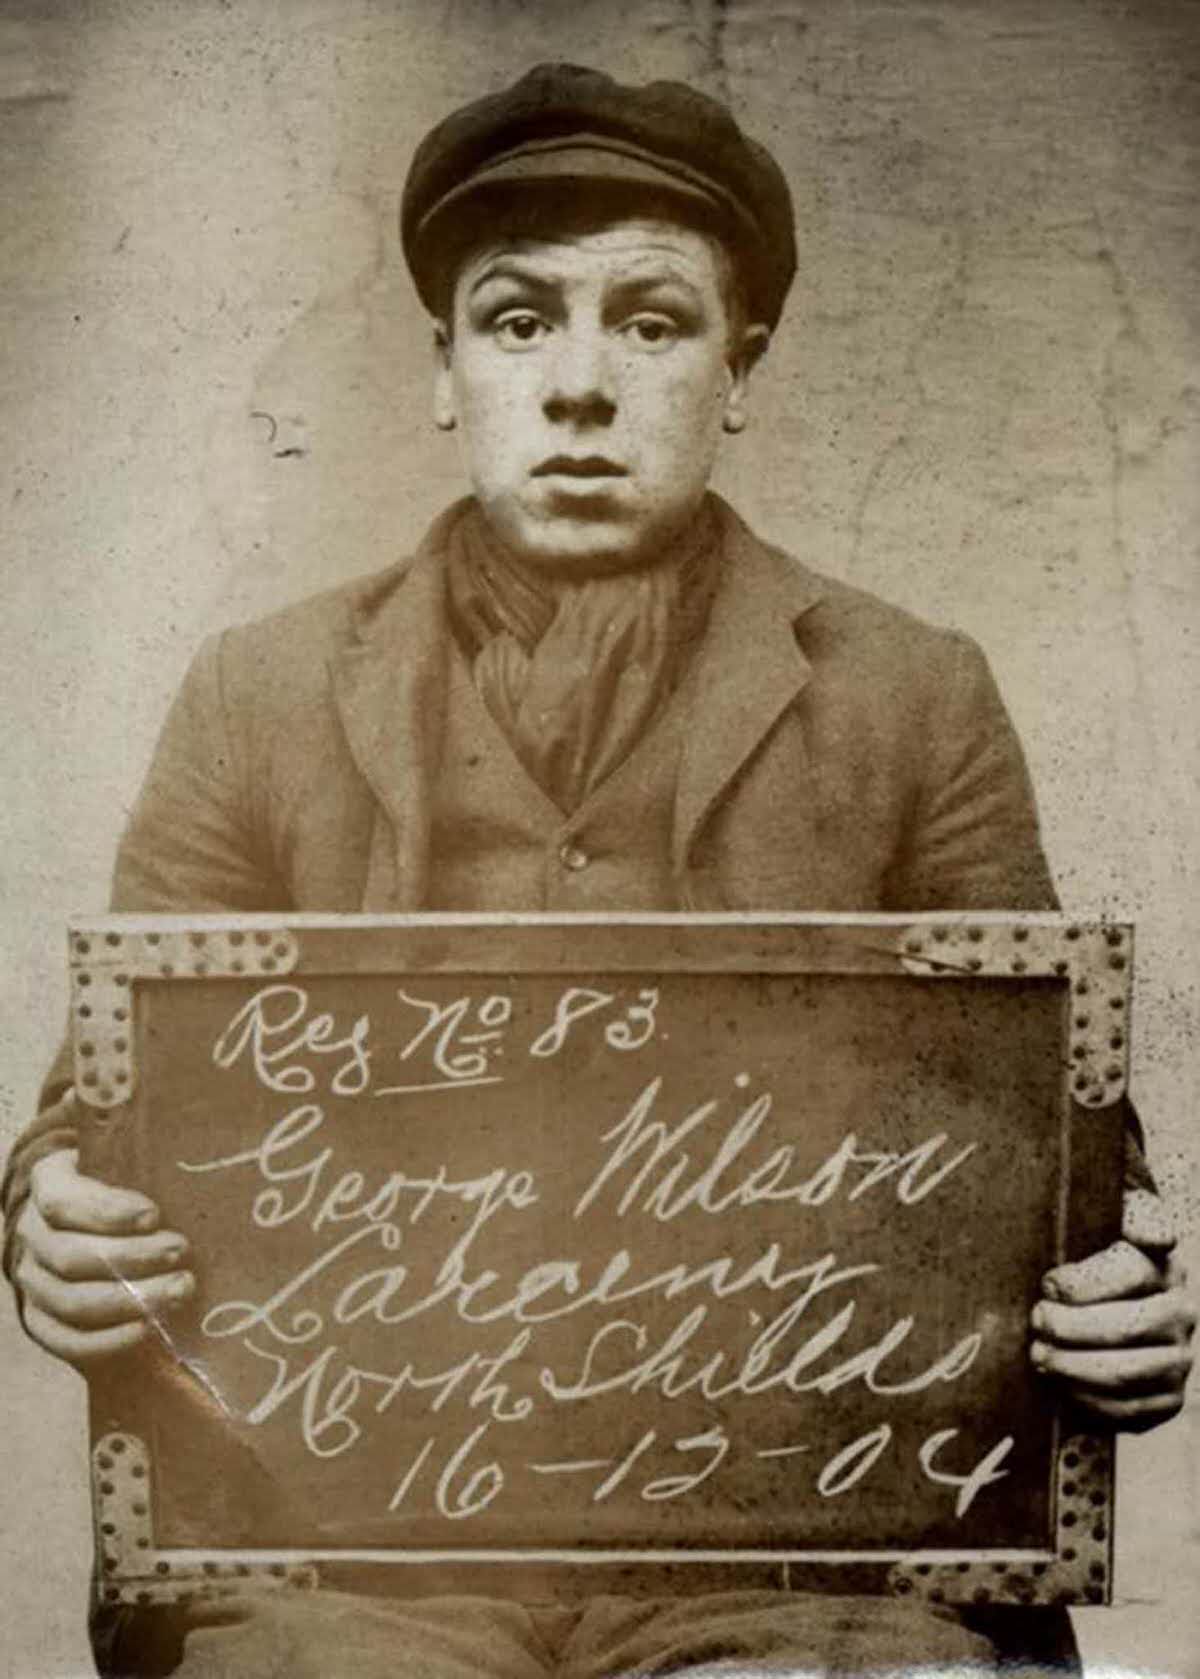 George Wilson, 17, arrested for stealing from his father, 1907.